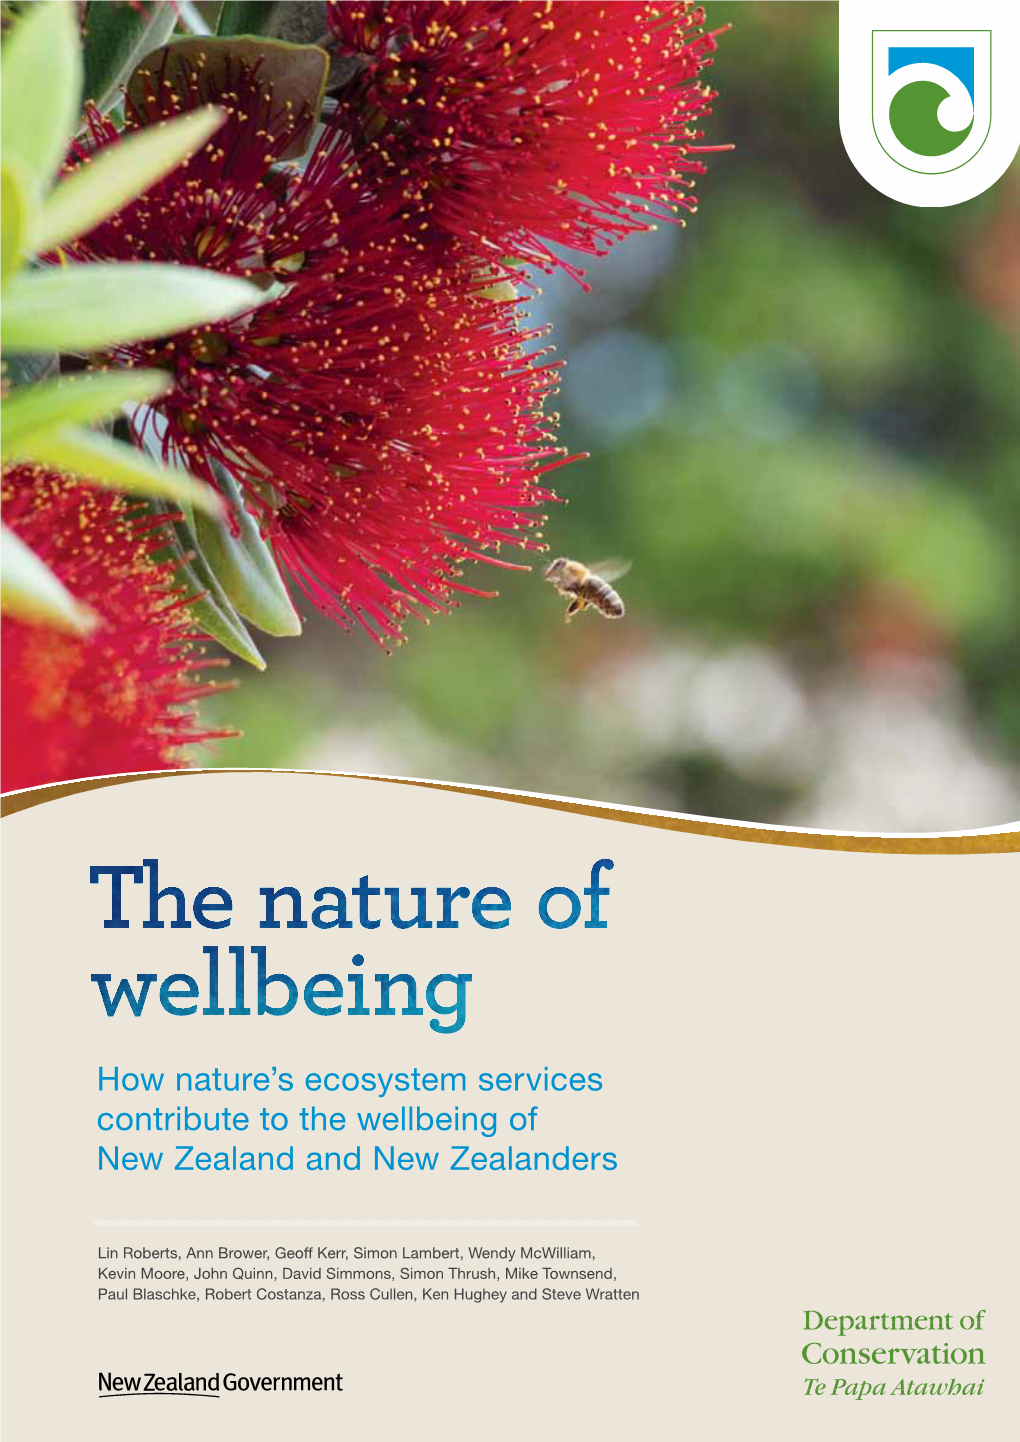 How Nature's Ecosystem Services Contribute to the Wellbeing of New